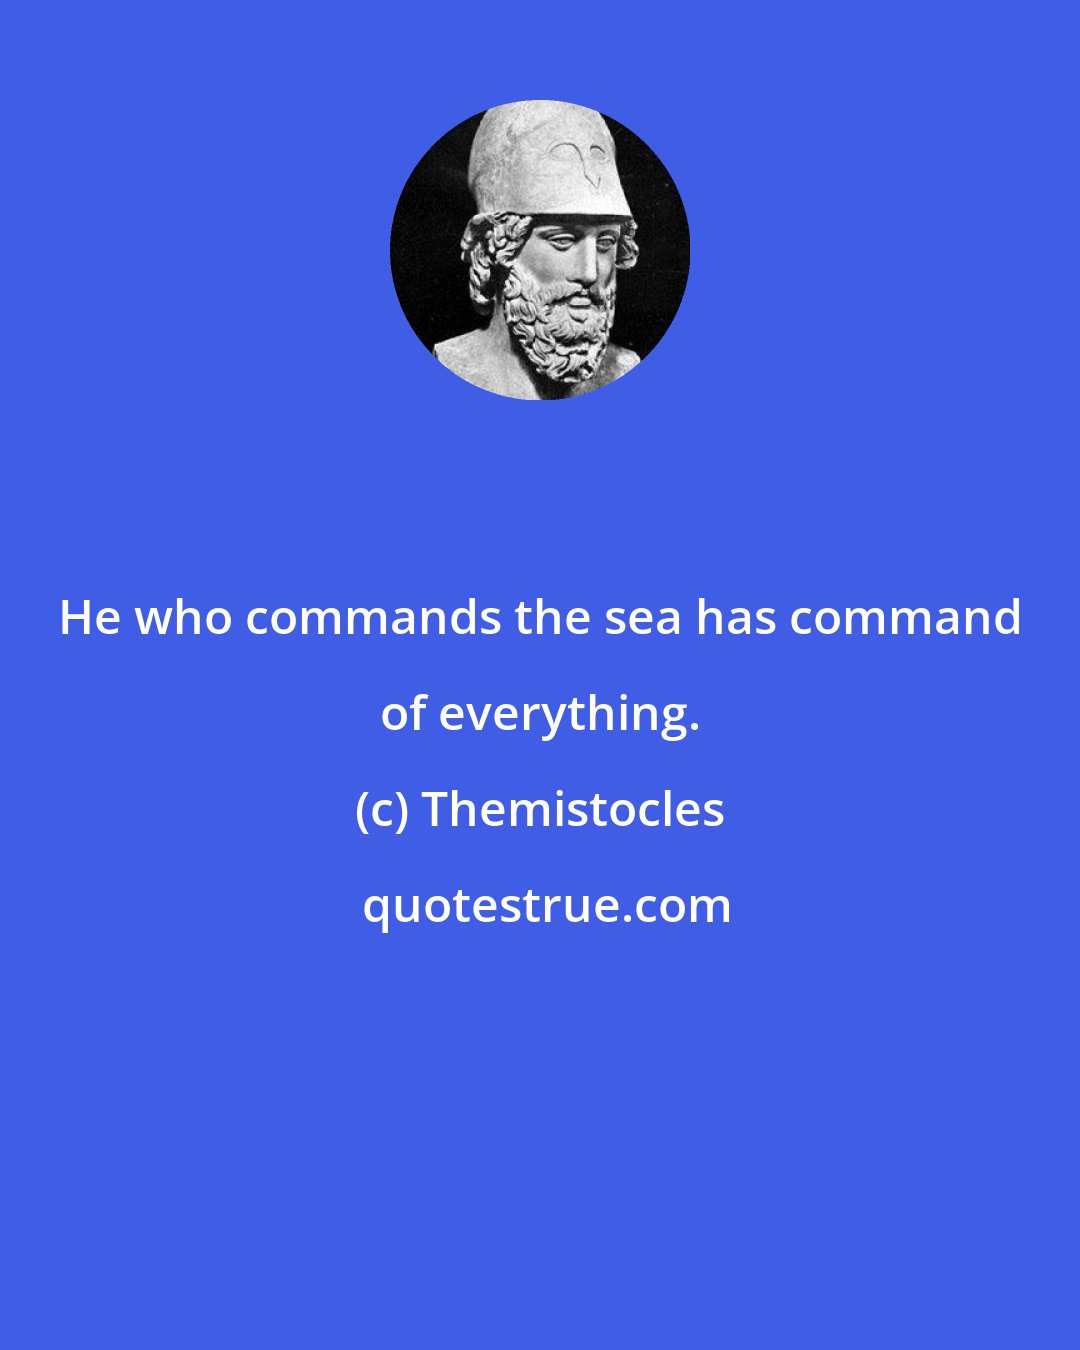 Themistocles: He who commands the sea has command of everything.